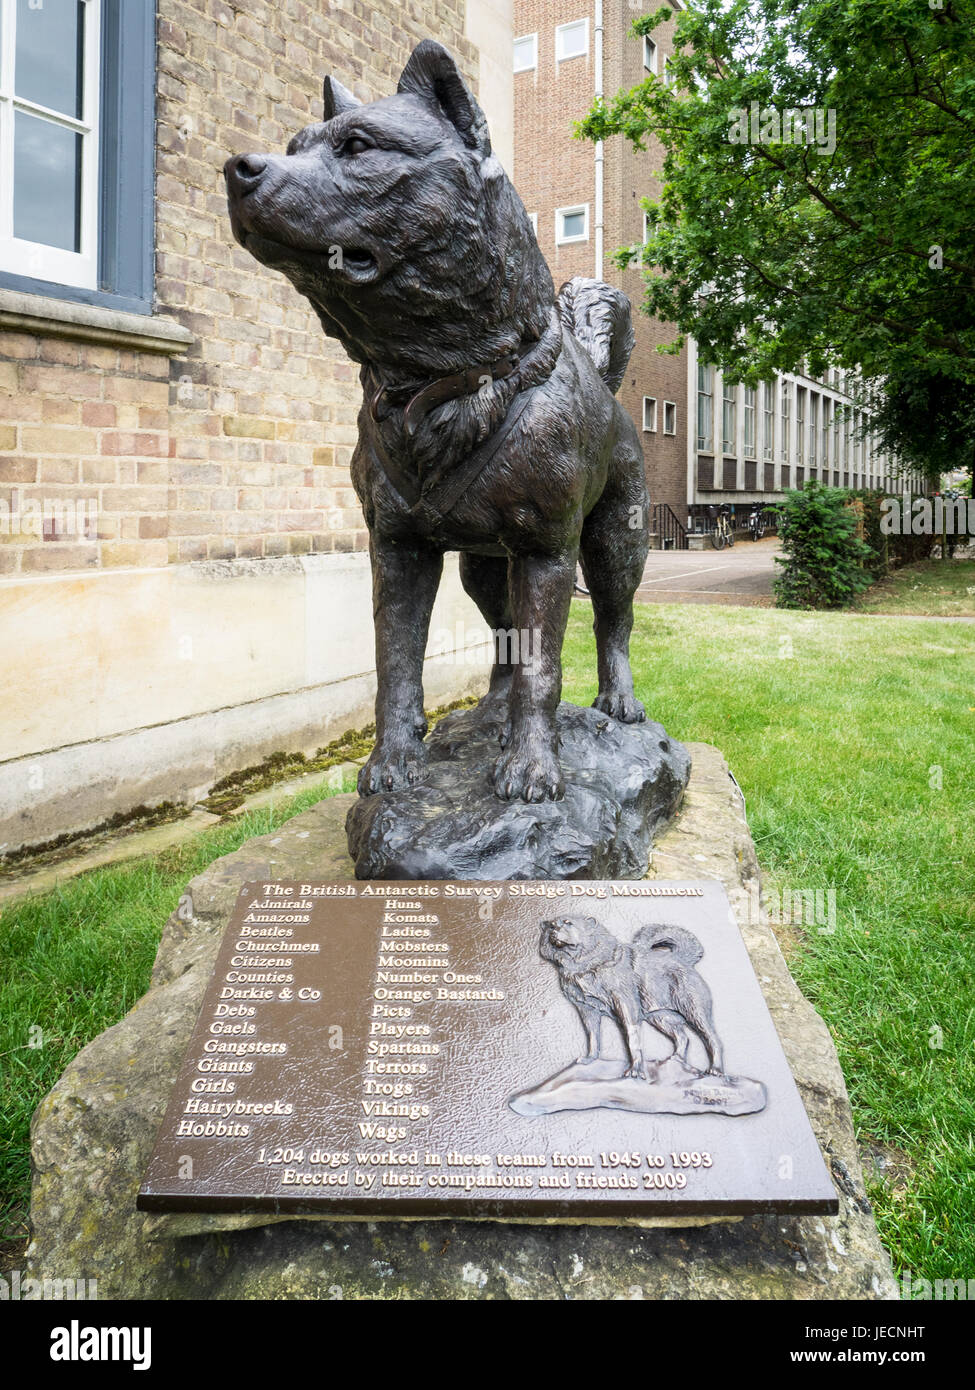 Polar Expedition Sled Dog Memorial Statue at the Scott Polar Research Institute in Cambridge, part of the University of Cambridge Stock Photo